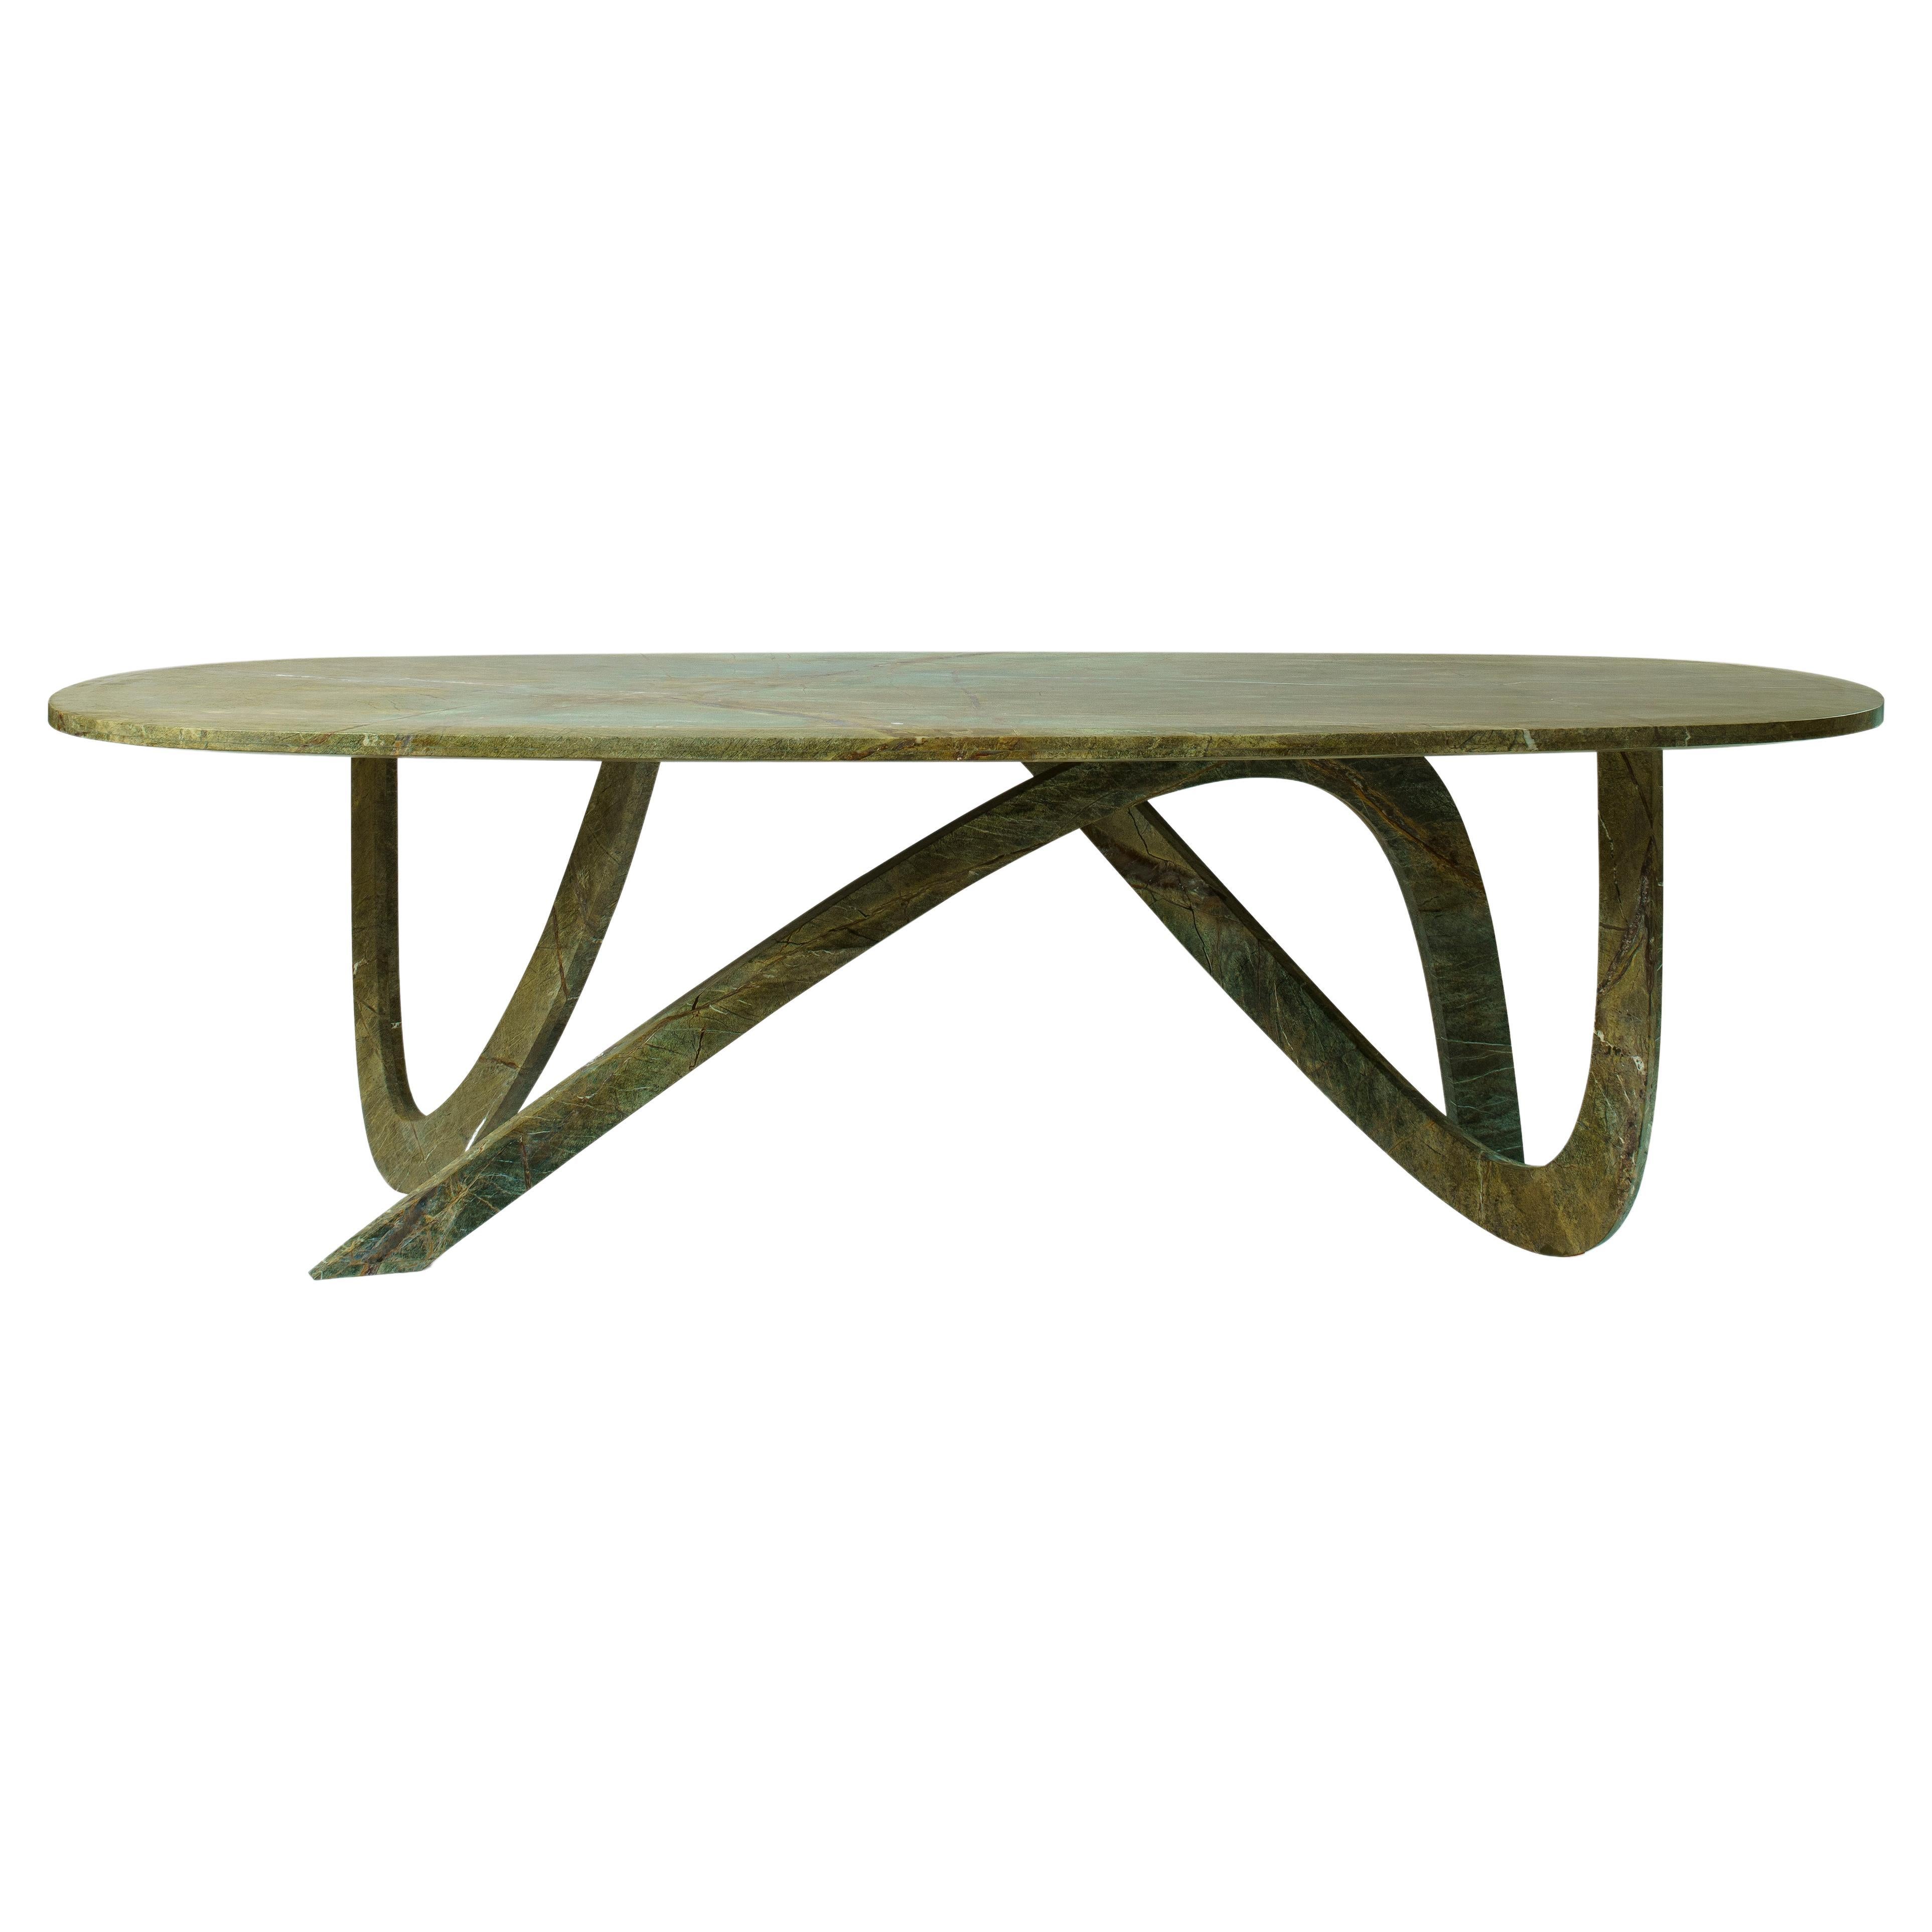 Fleur Dining Table by Dam Atelier for Delvis Unlimited Green Marble  For Sale